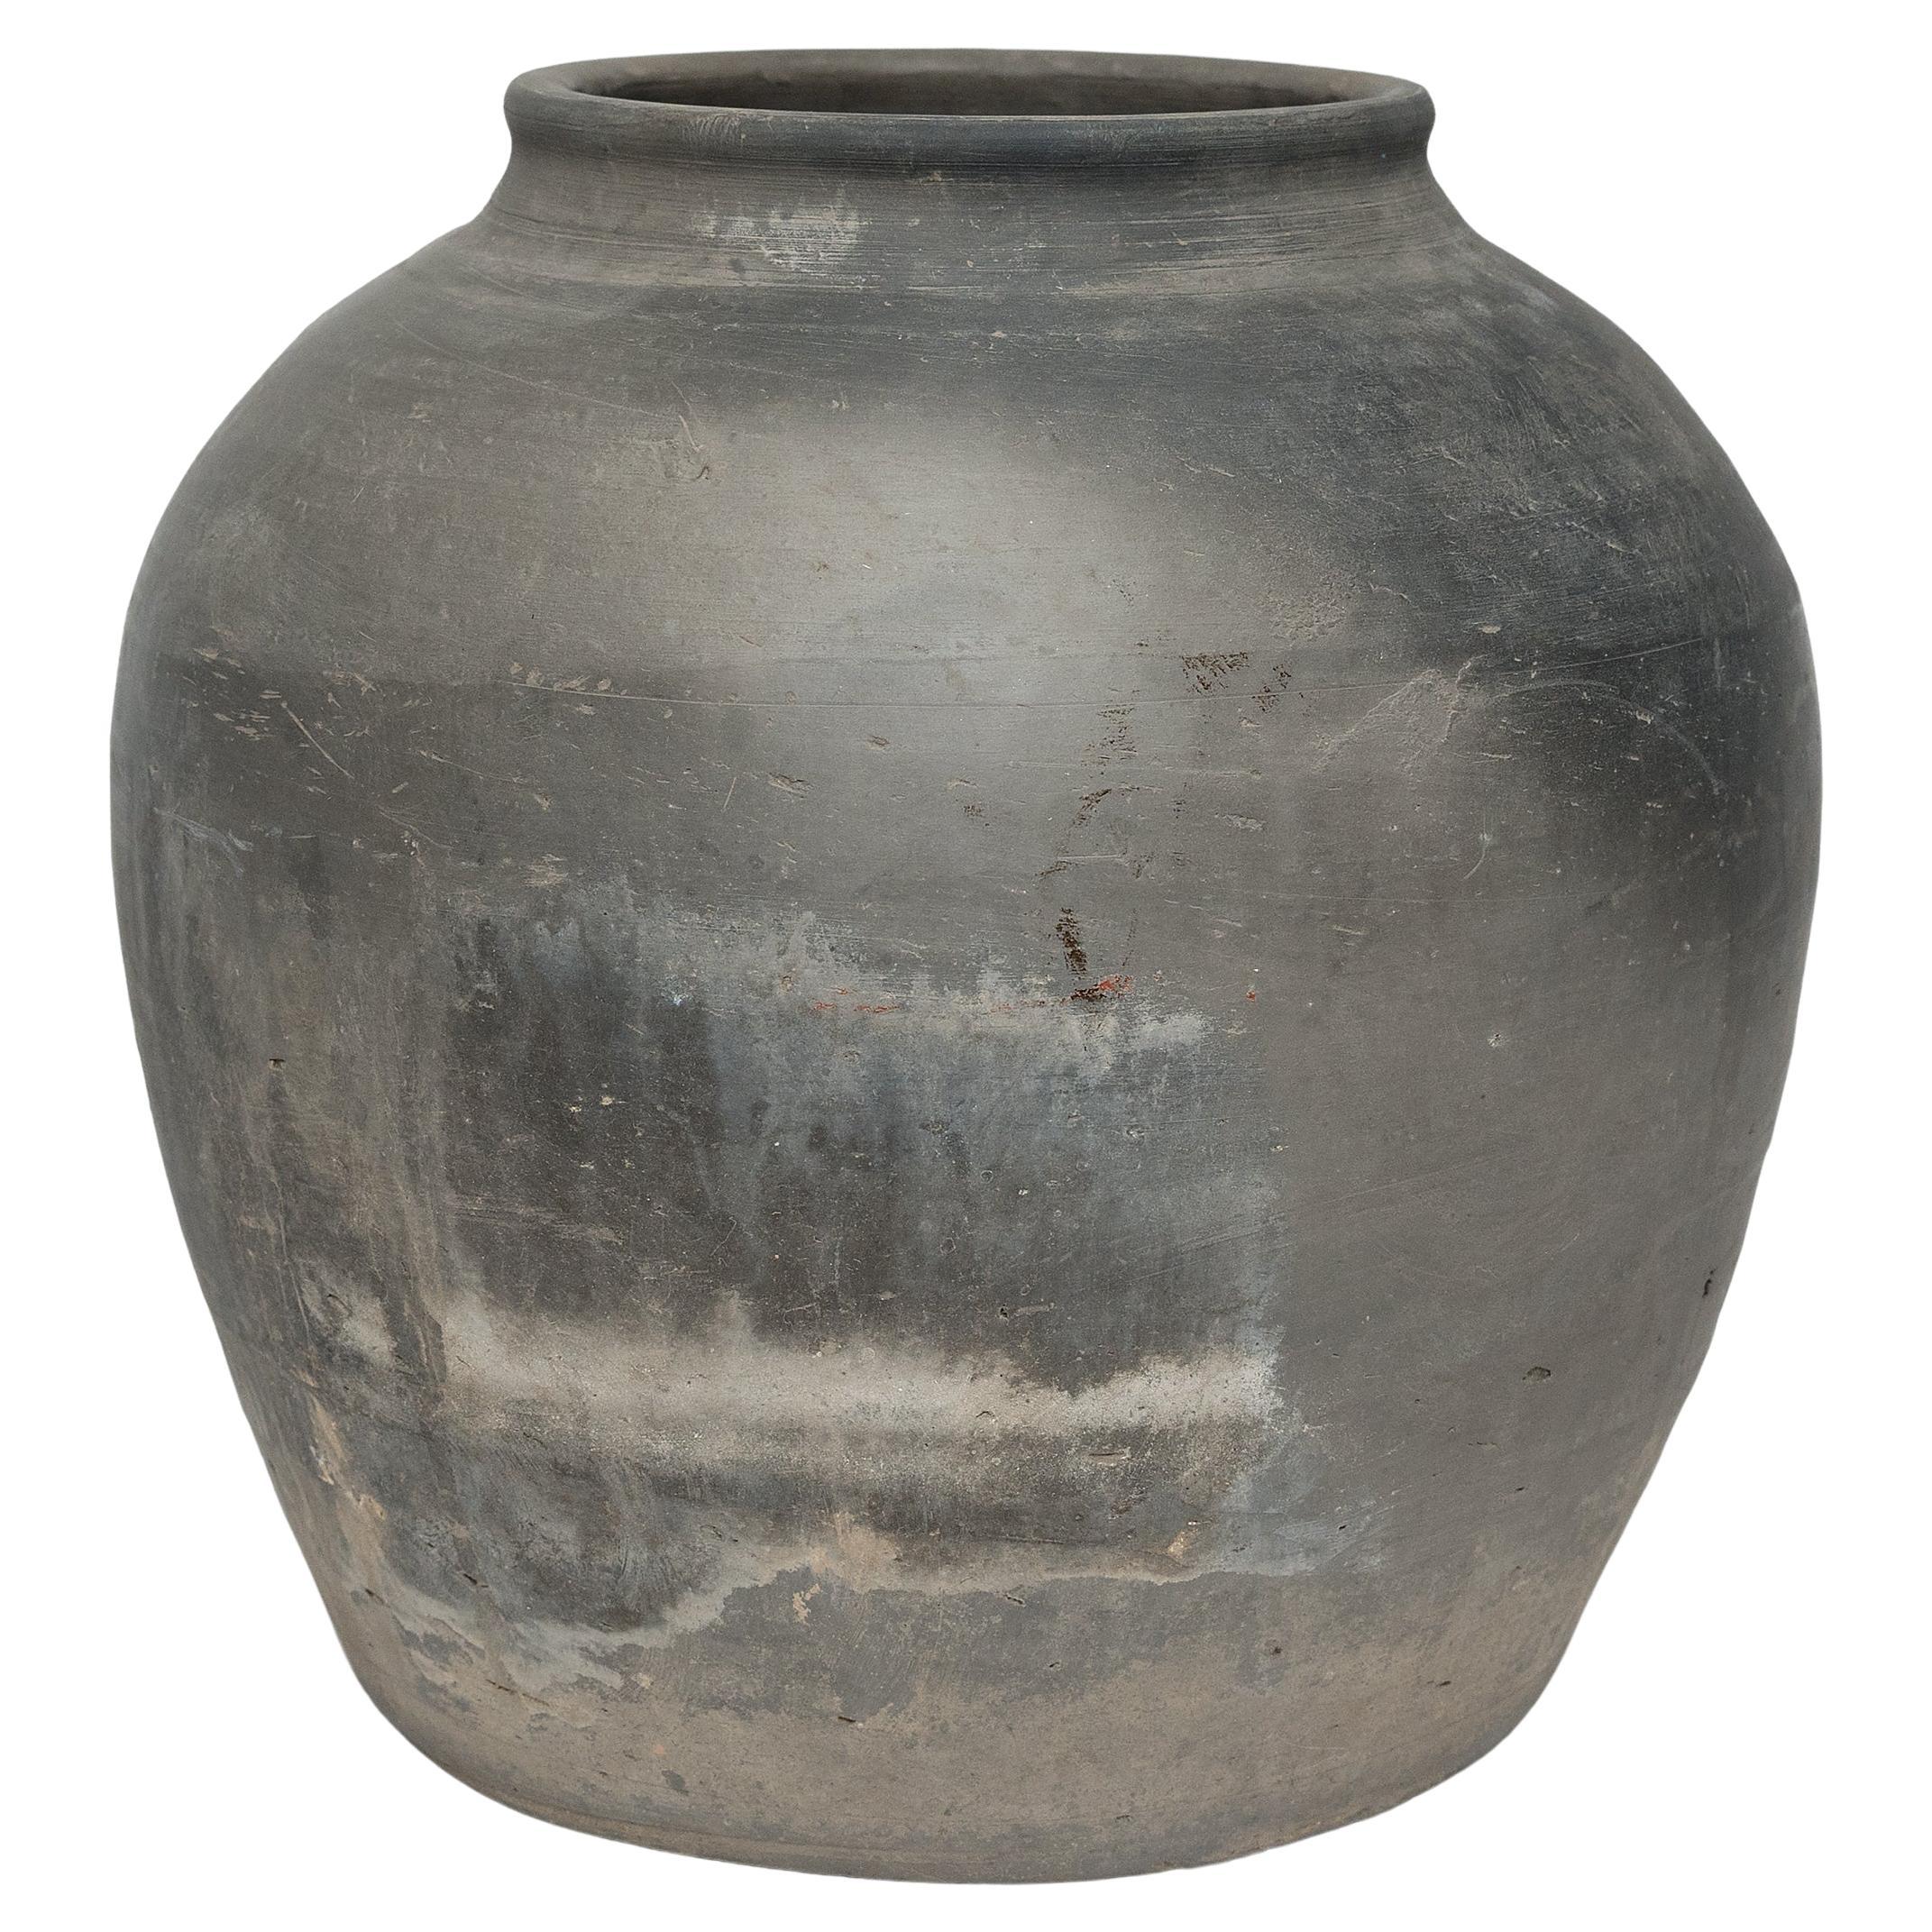 Sculpted during the early 20th century in China's Shanxi province, this vessel has a mottled grey exterior with balanced proportions and a beautifully irregular unglazed surface. Charged with the humble task of storing dry goods, this earthenware